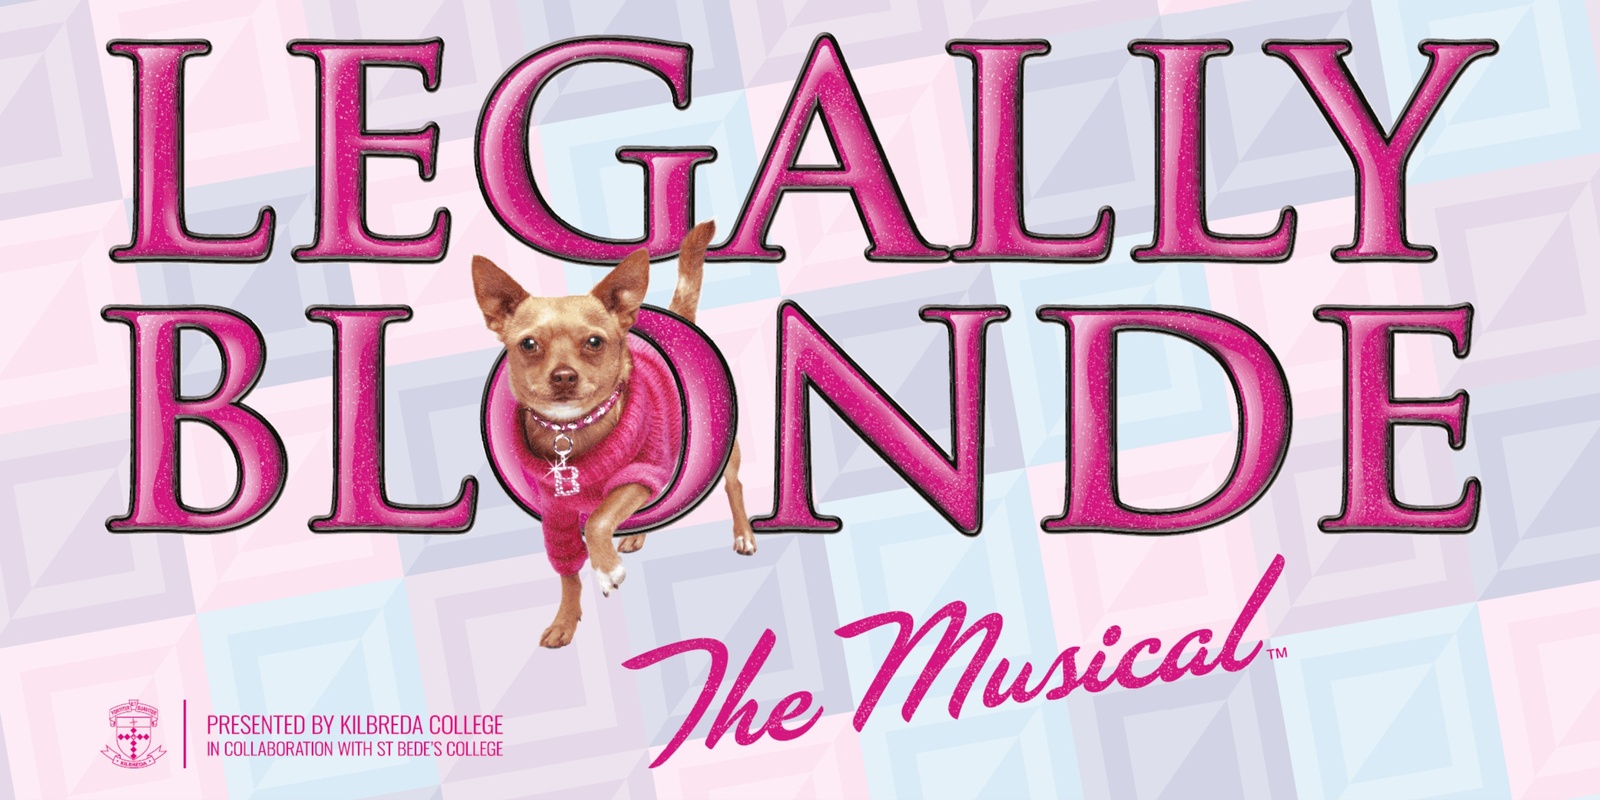 Banner image for Legally Blonde - The Musical